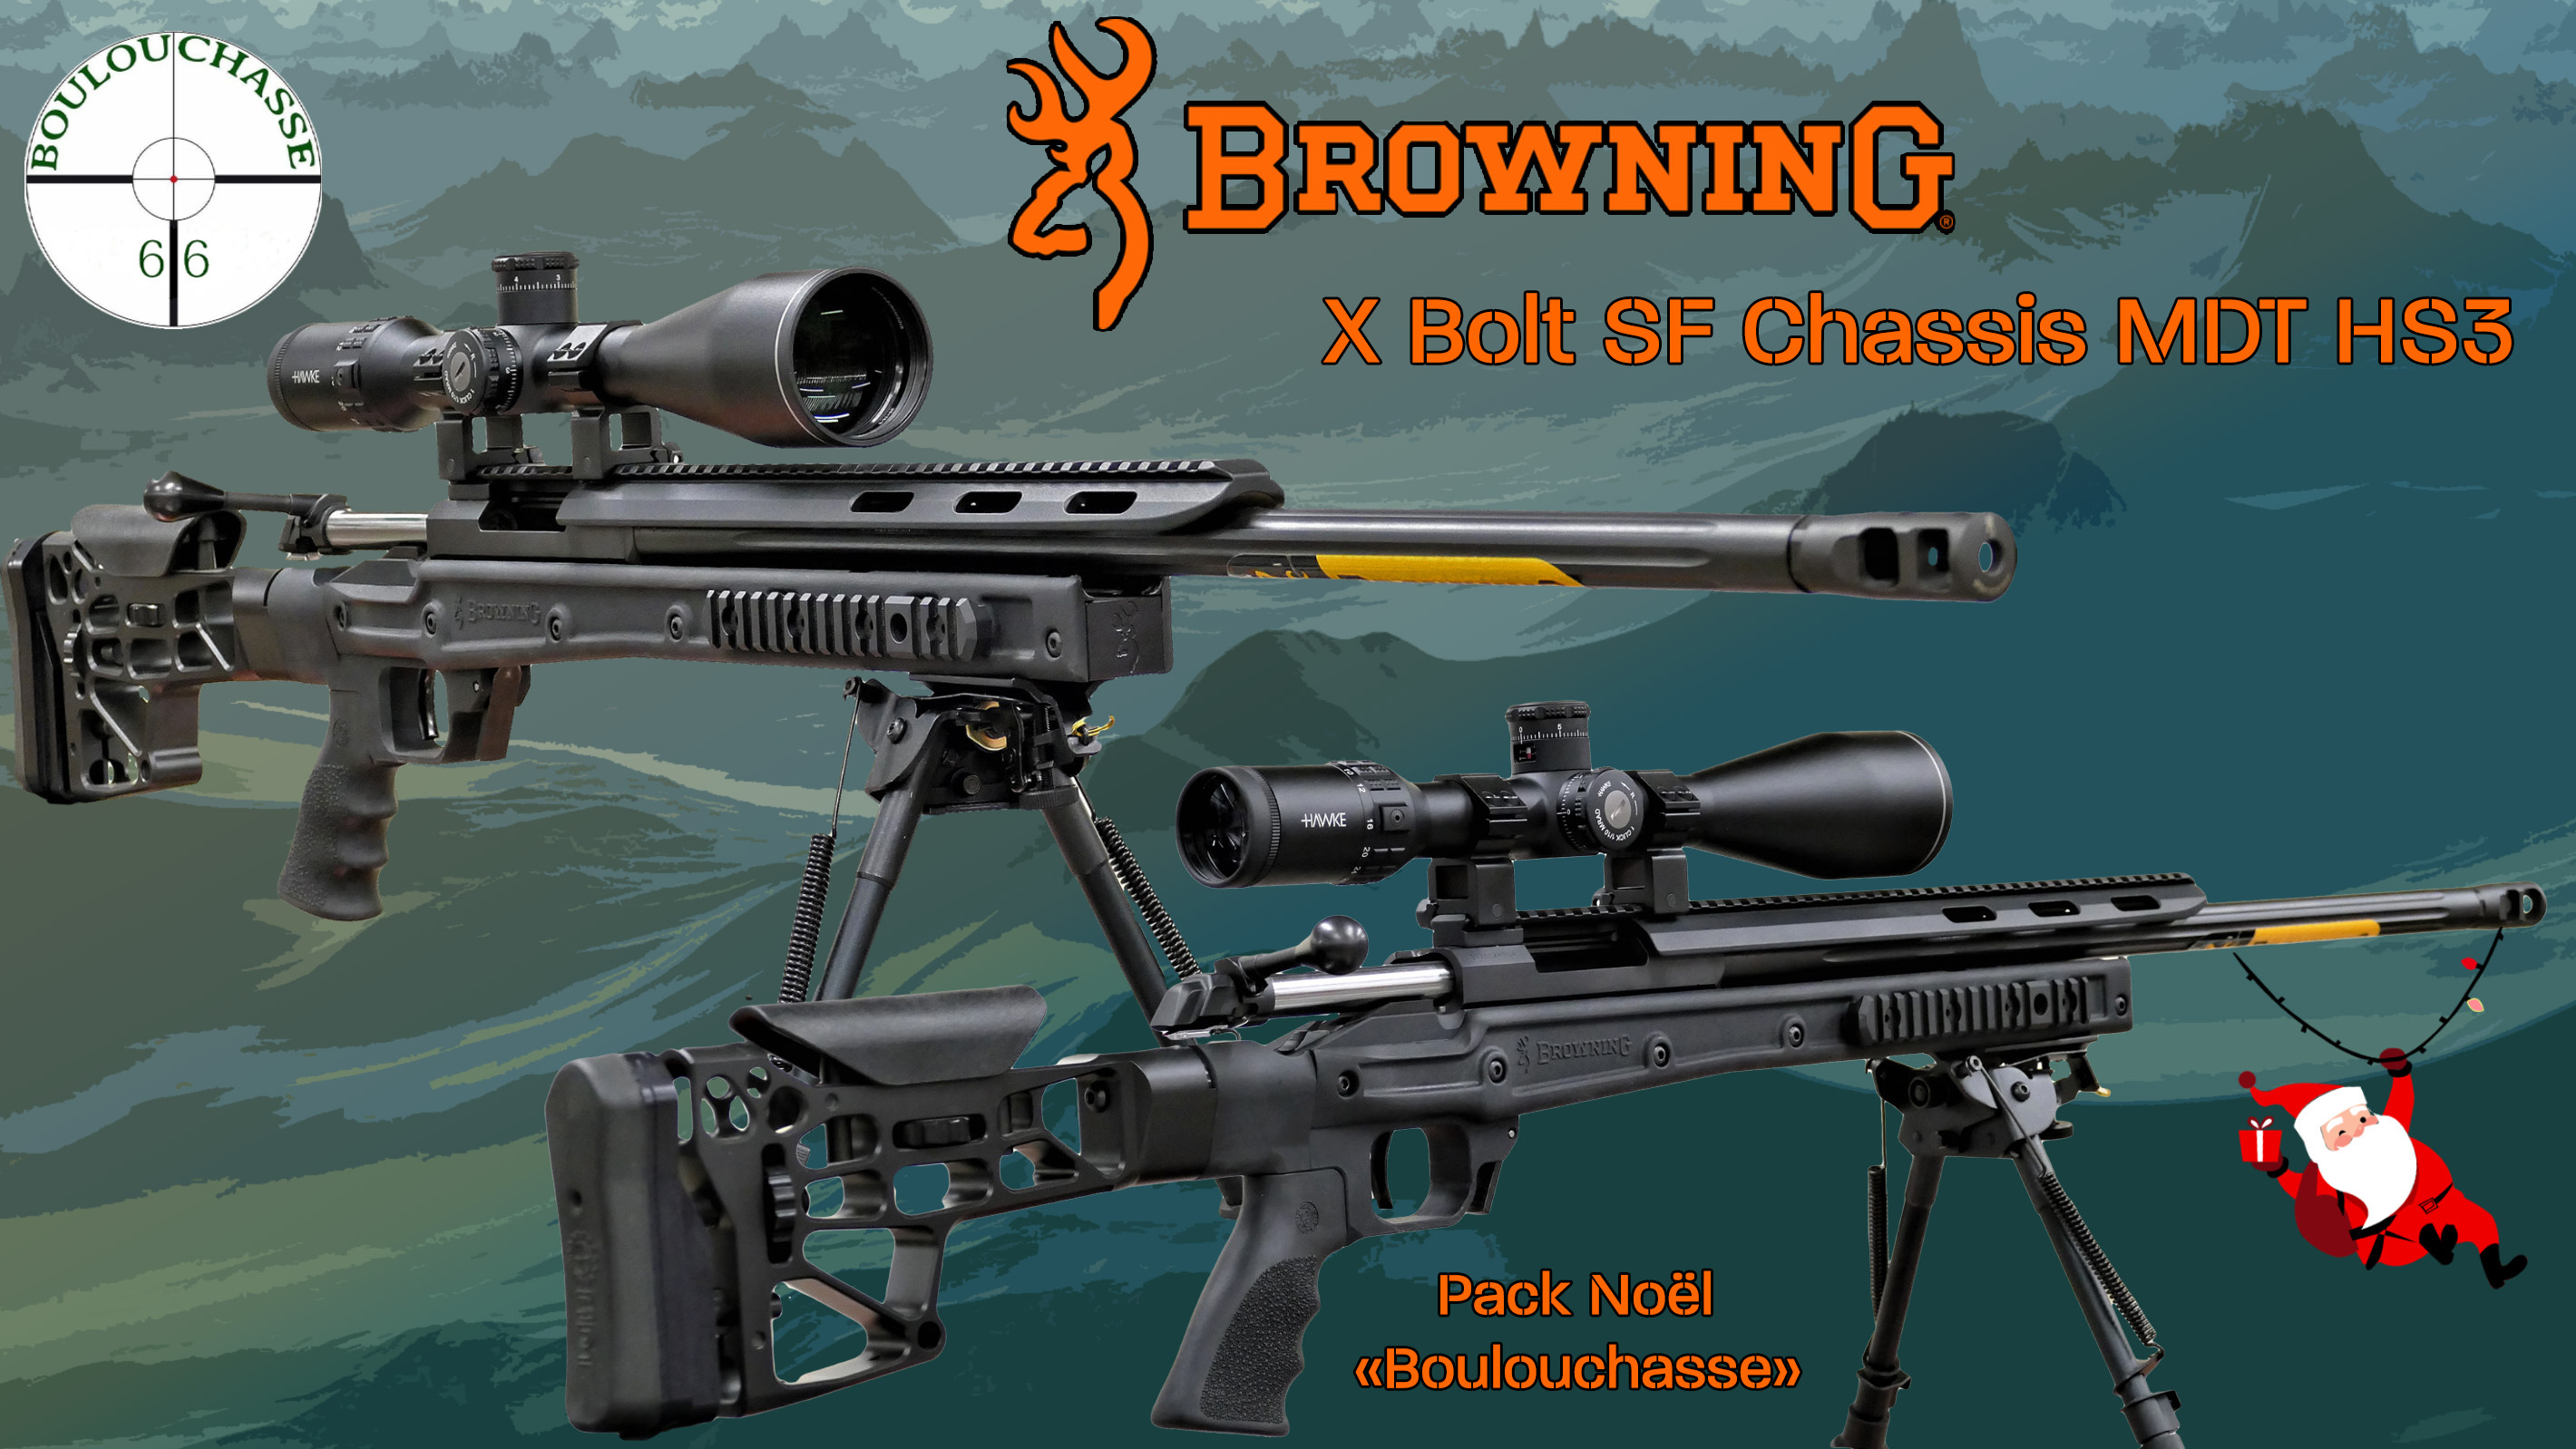 browning-x-bolt-chassis-mdt-boulouchasse-facebook